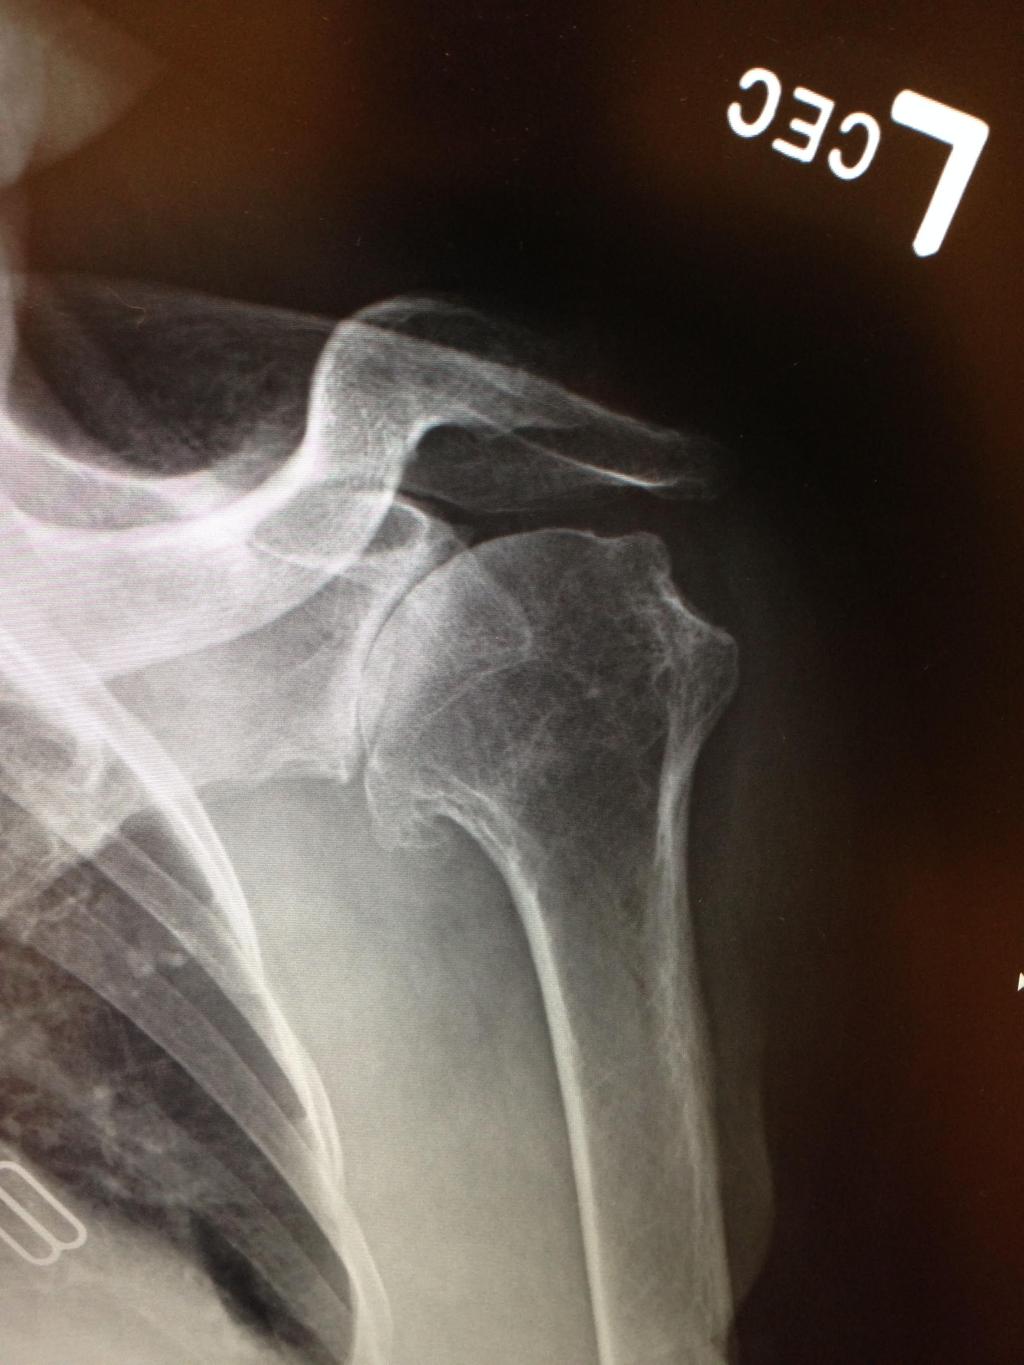 SHOULDER SERVICE TOTAL SHOULDER REPLACEMENT The following is